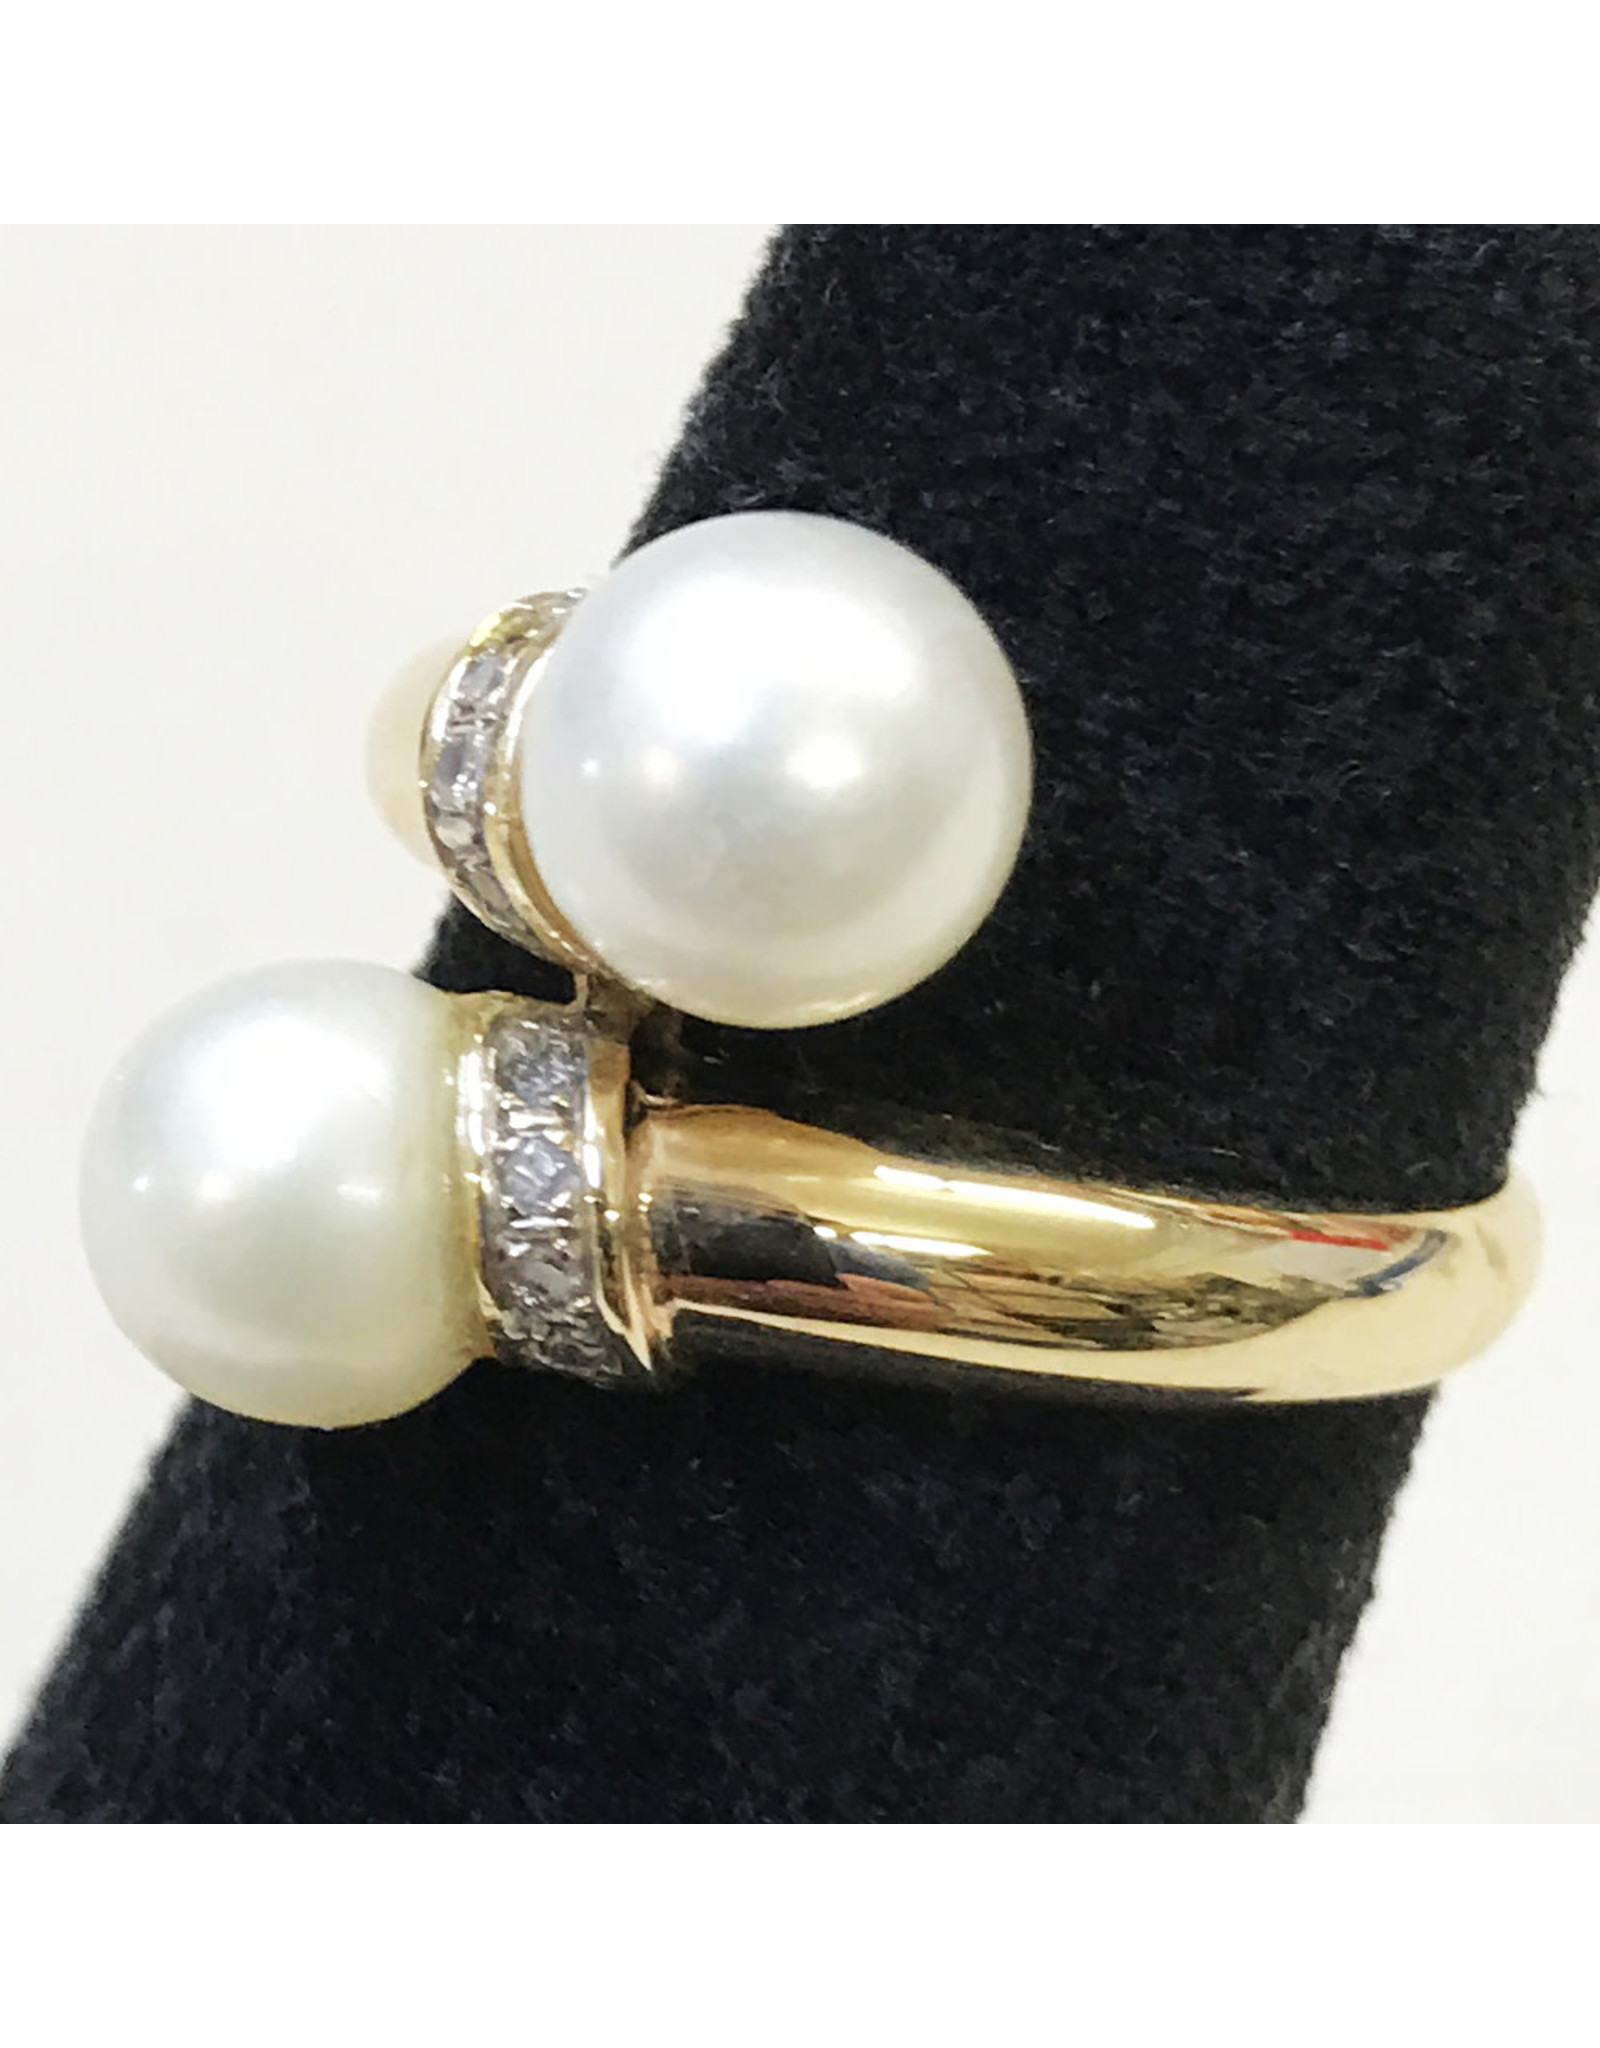 14k Gold Torque Ring with 2 Pearls and Diamonds